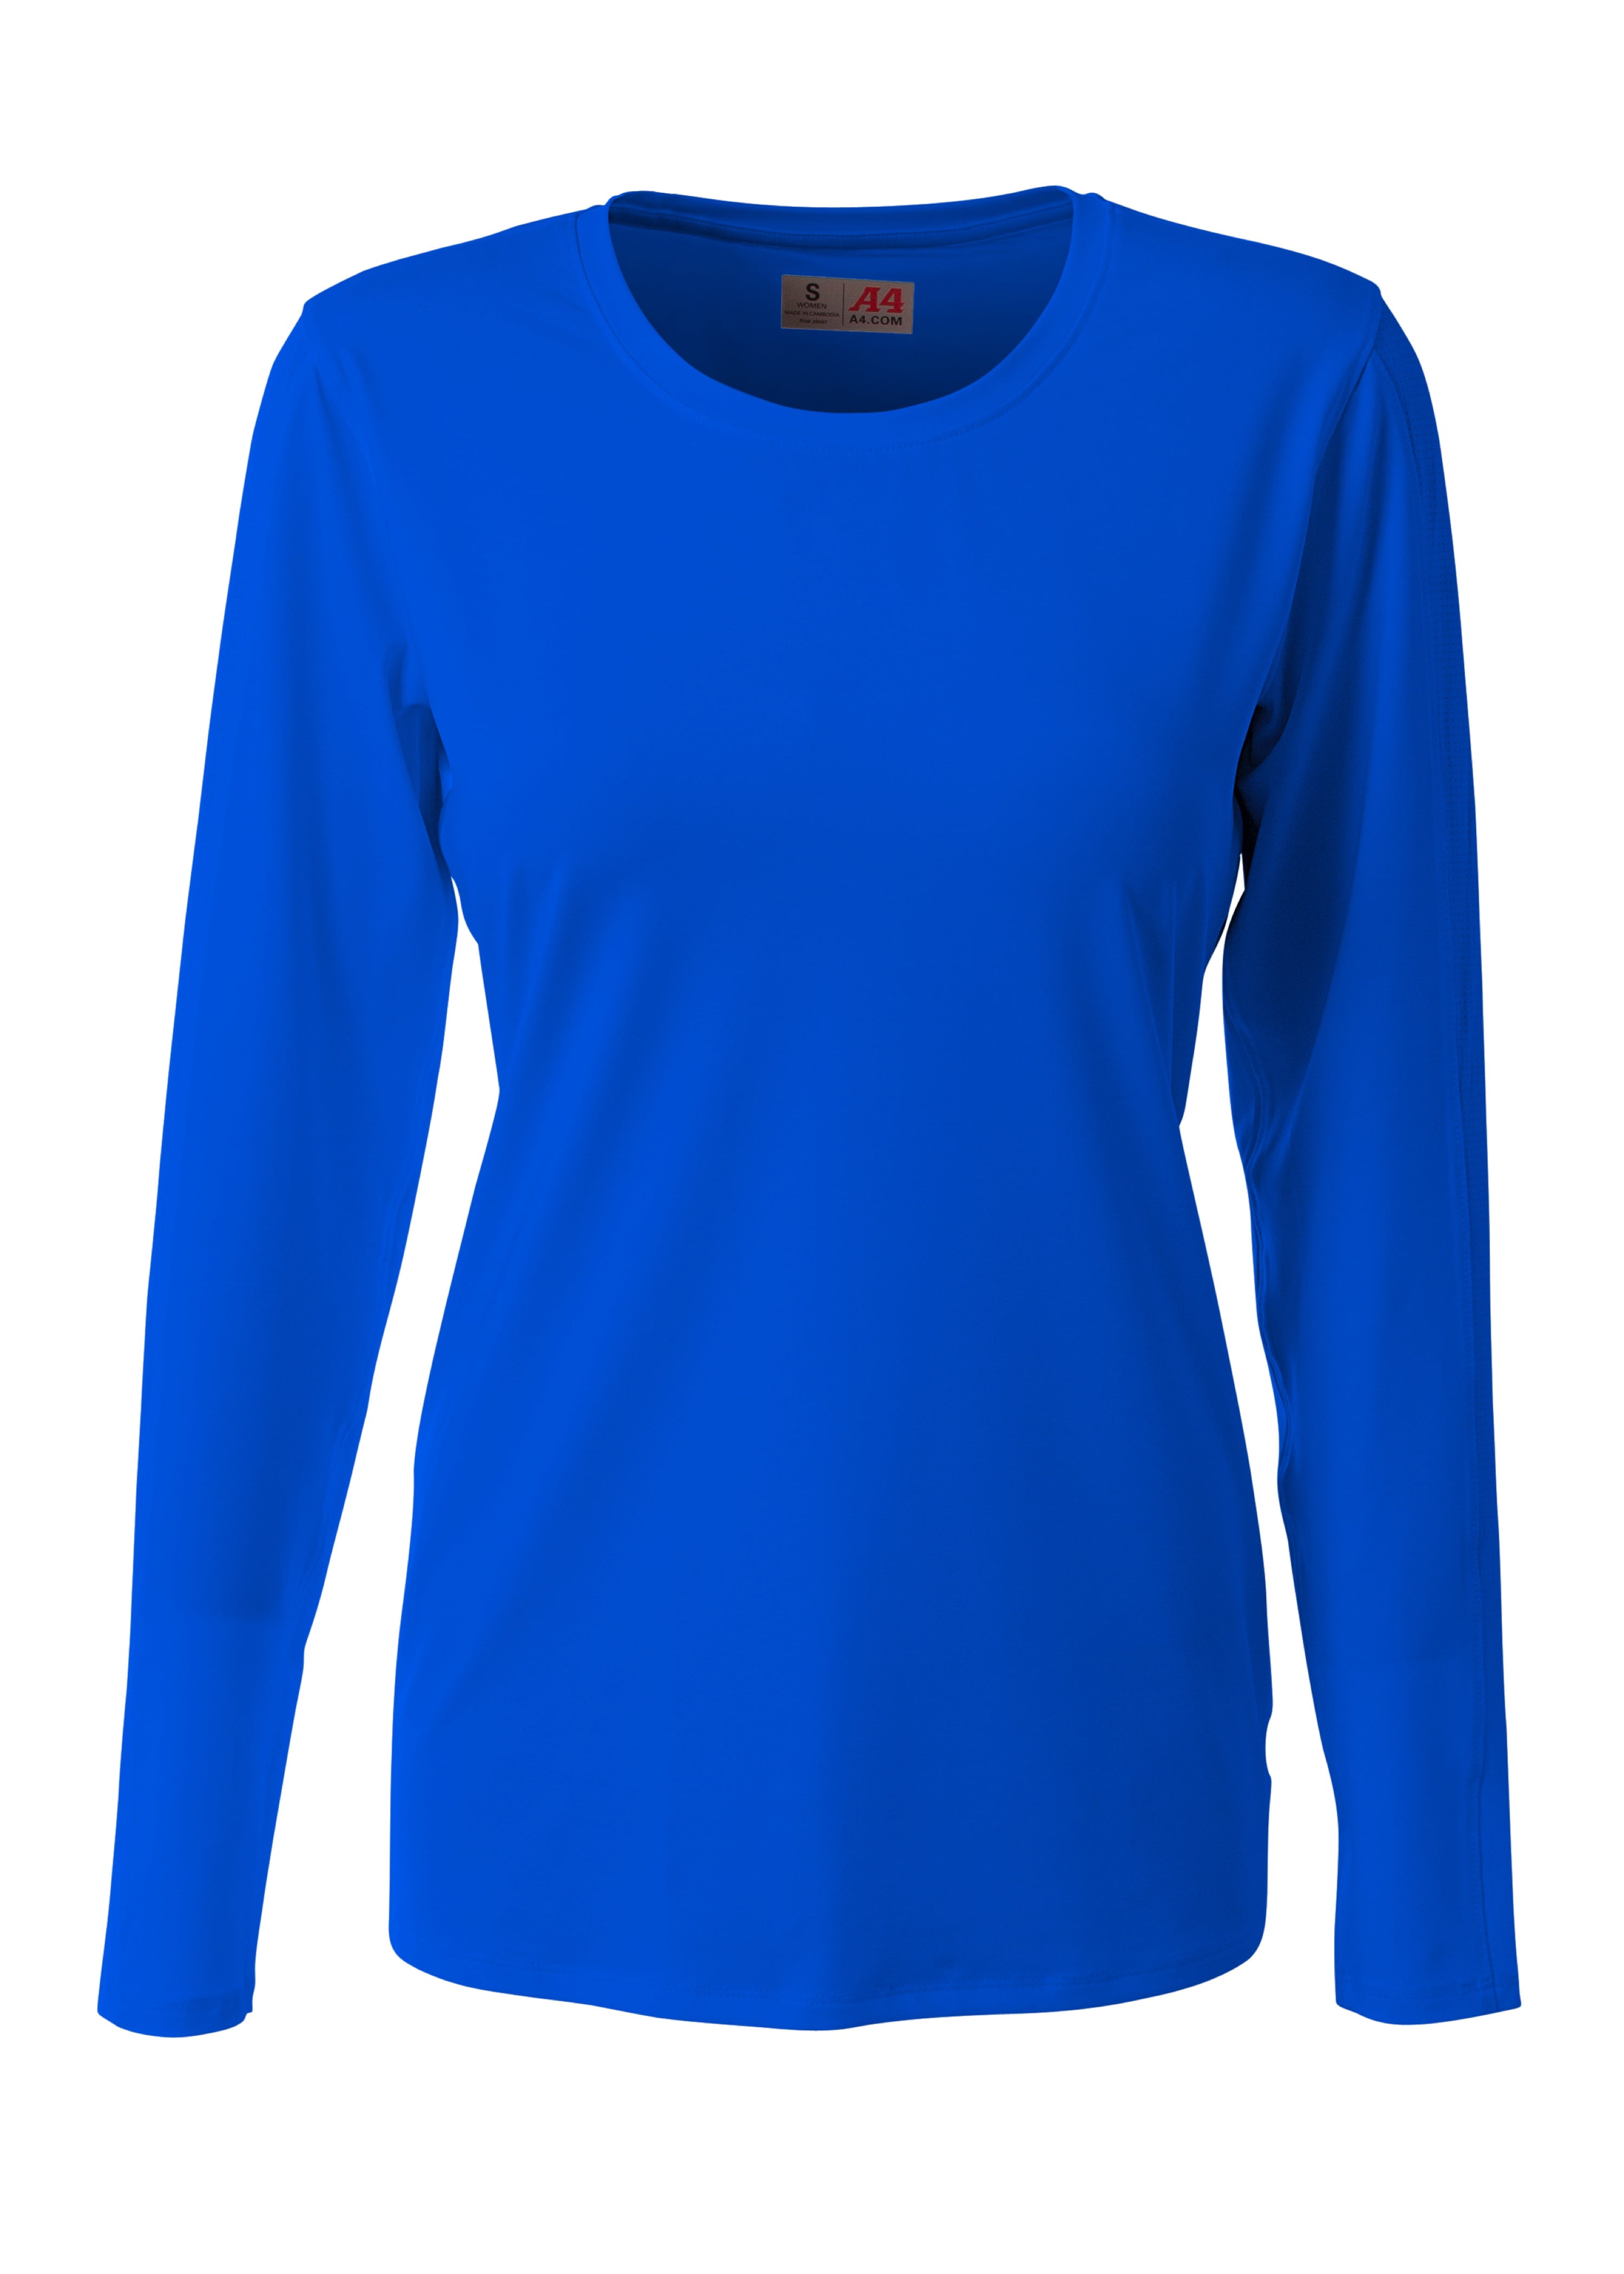 A4 Youth Spike Long Sleeve Volleyball Je ROYAL L - Walmart.com ...